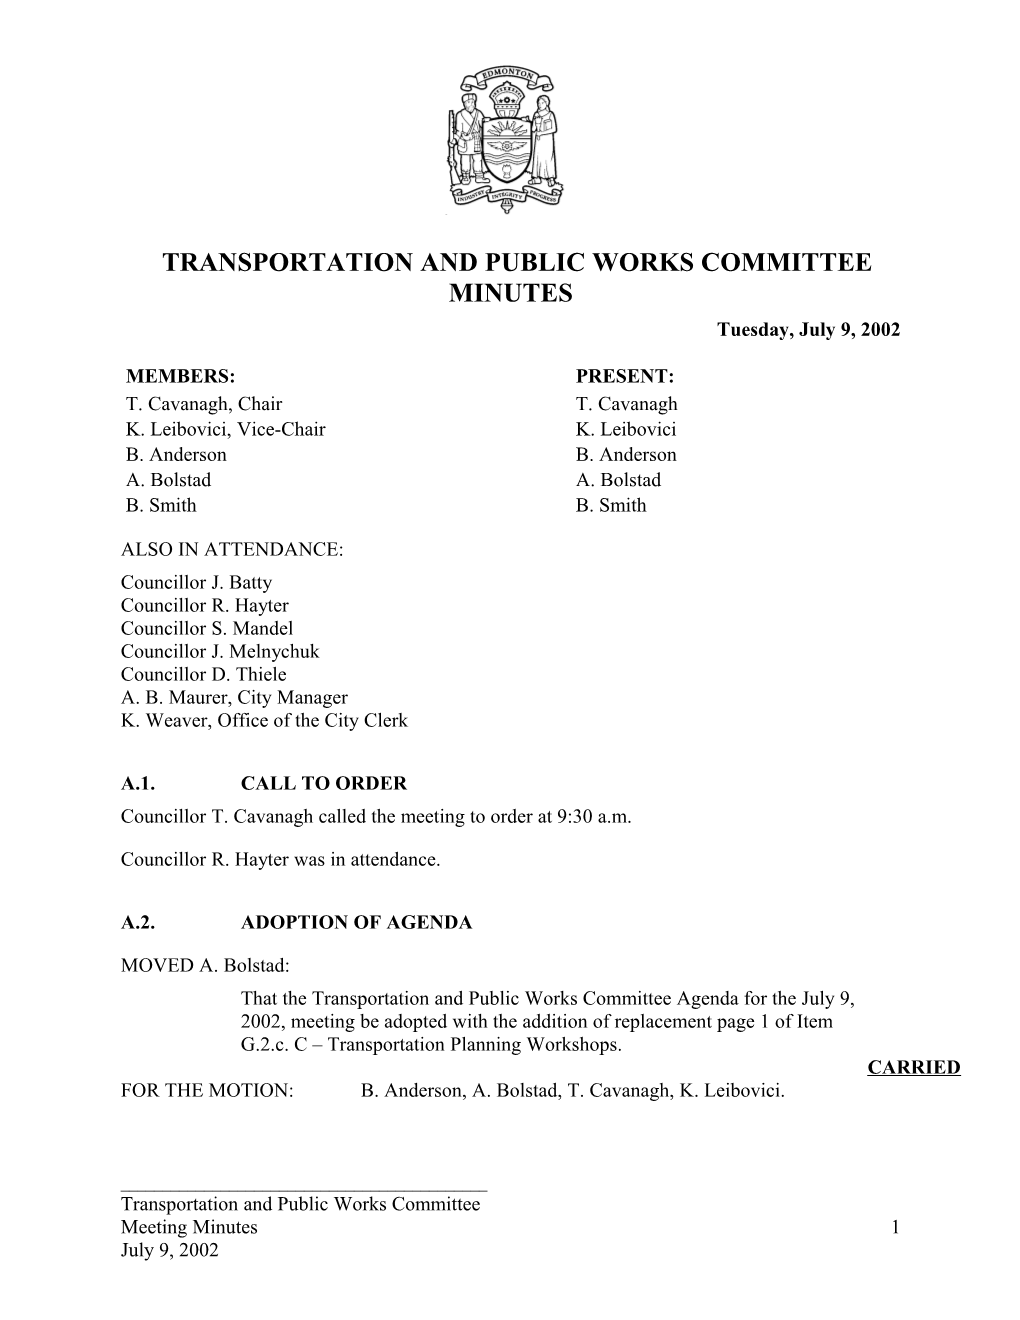 Minutes for Transportation and Public Works Committee July 9, 2002 Meeting